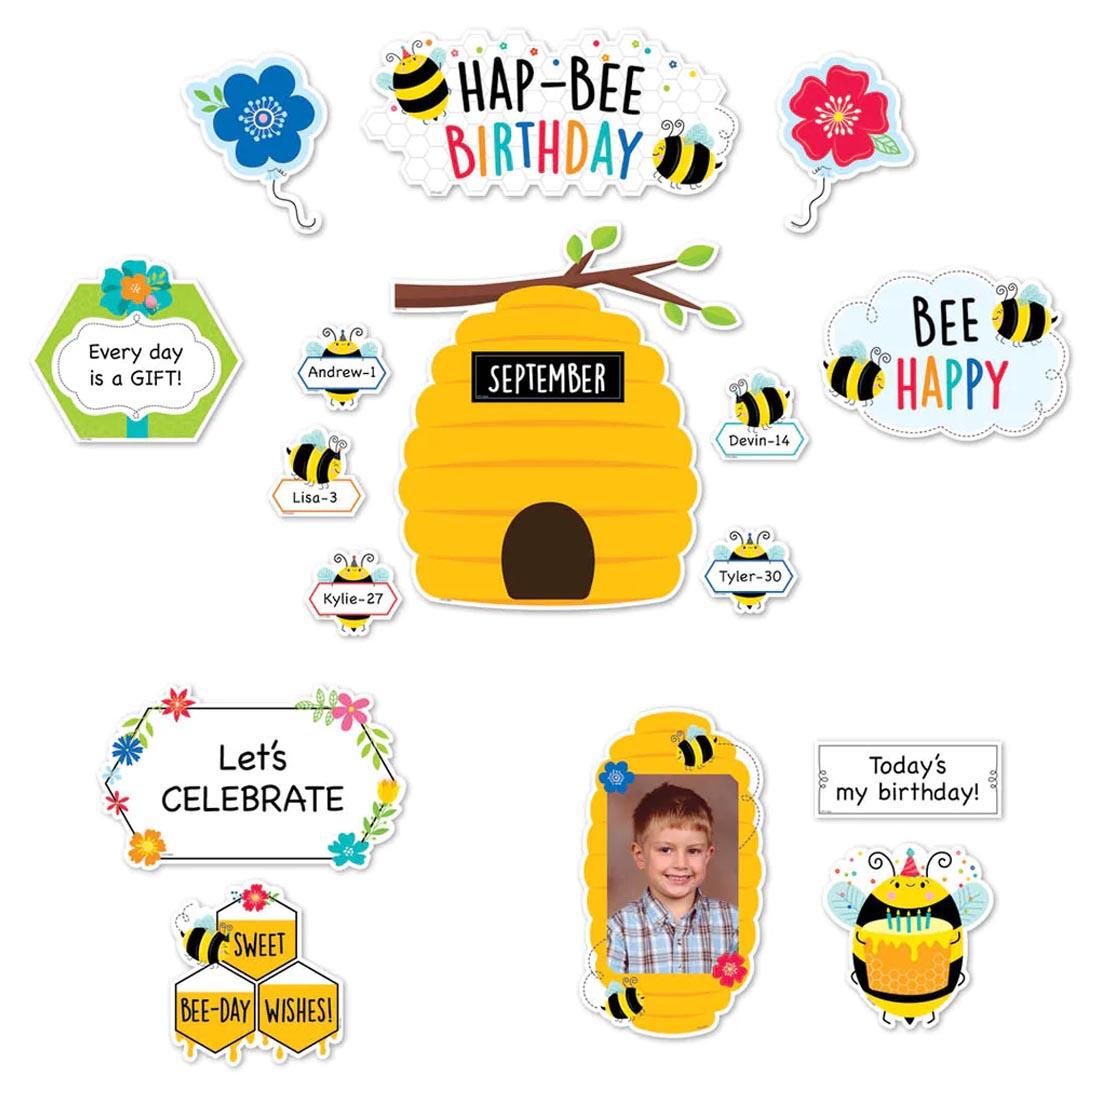 Pieces from the Busy Bees Birthday Bees Mini Bulletin Board Set By Creative Teaching Press